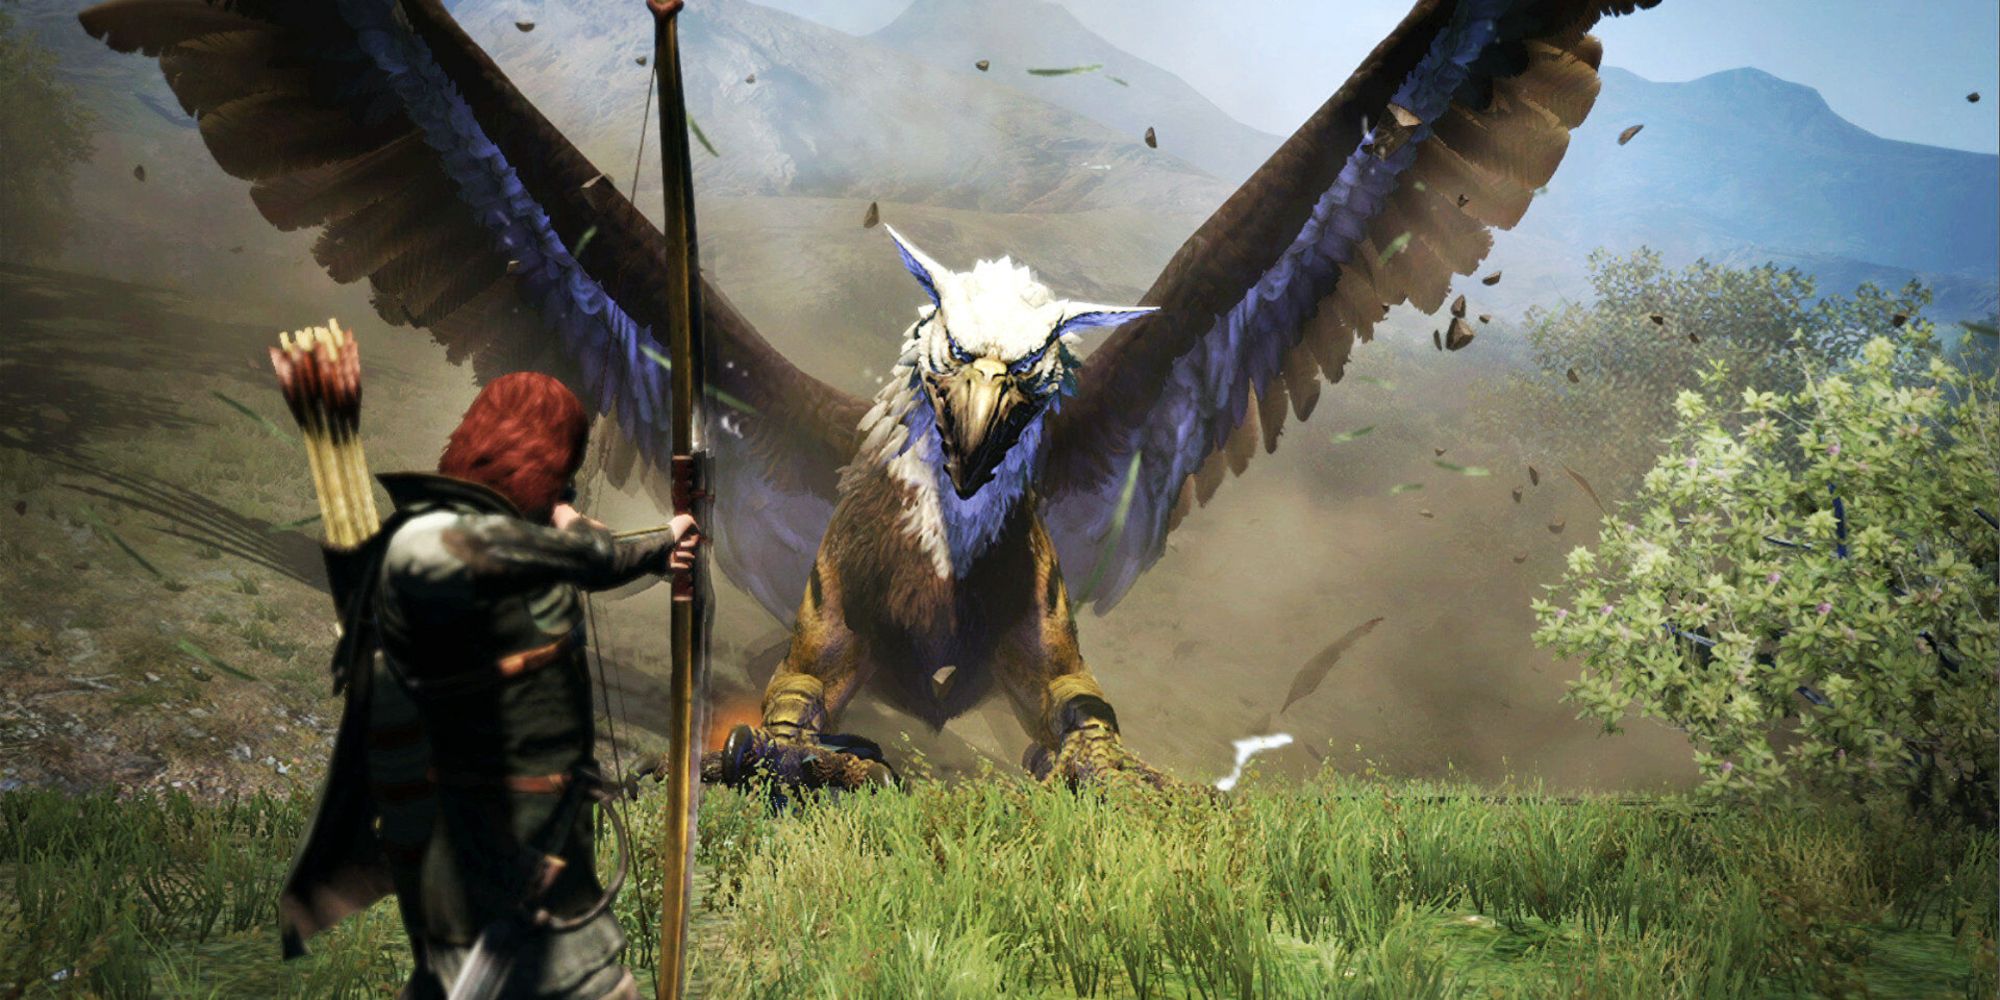 Dragon's Dogma still has some of the best RPG combat around